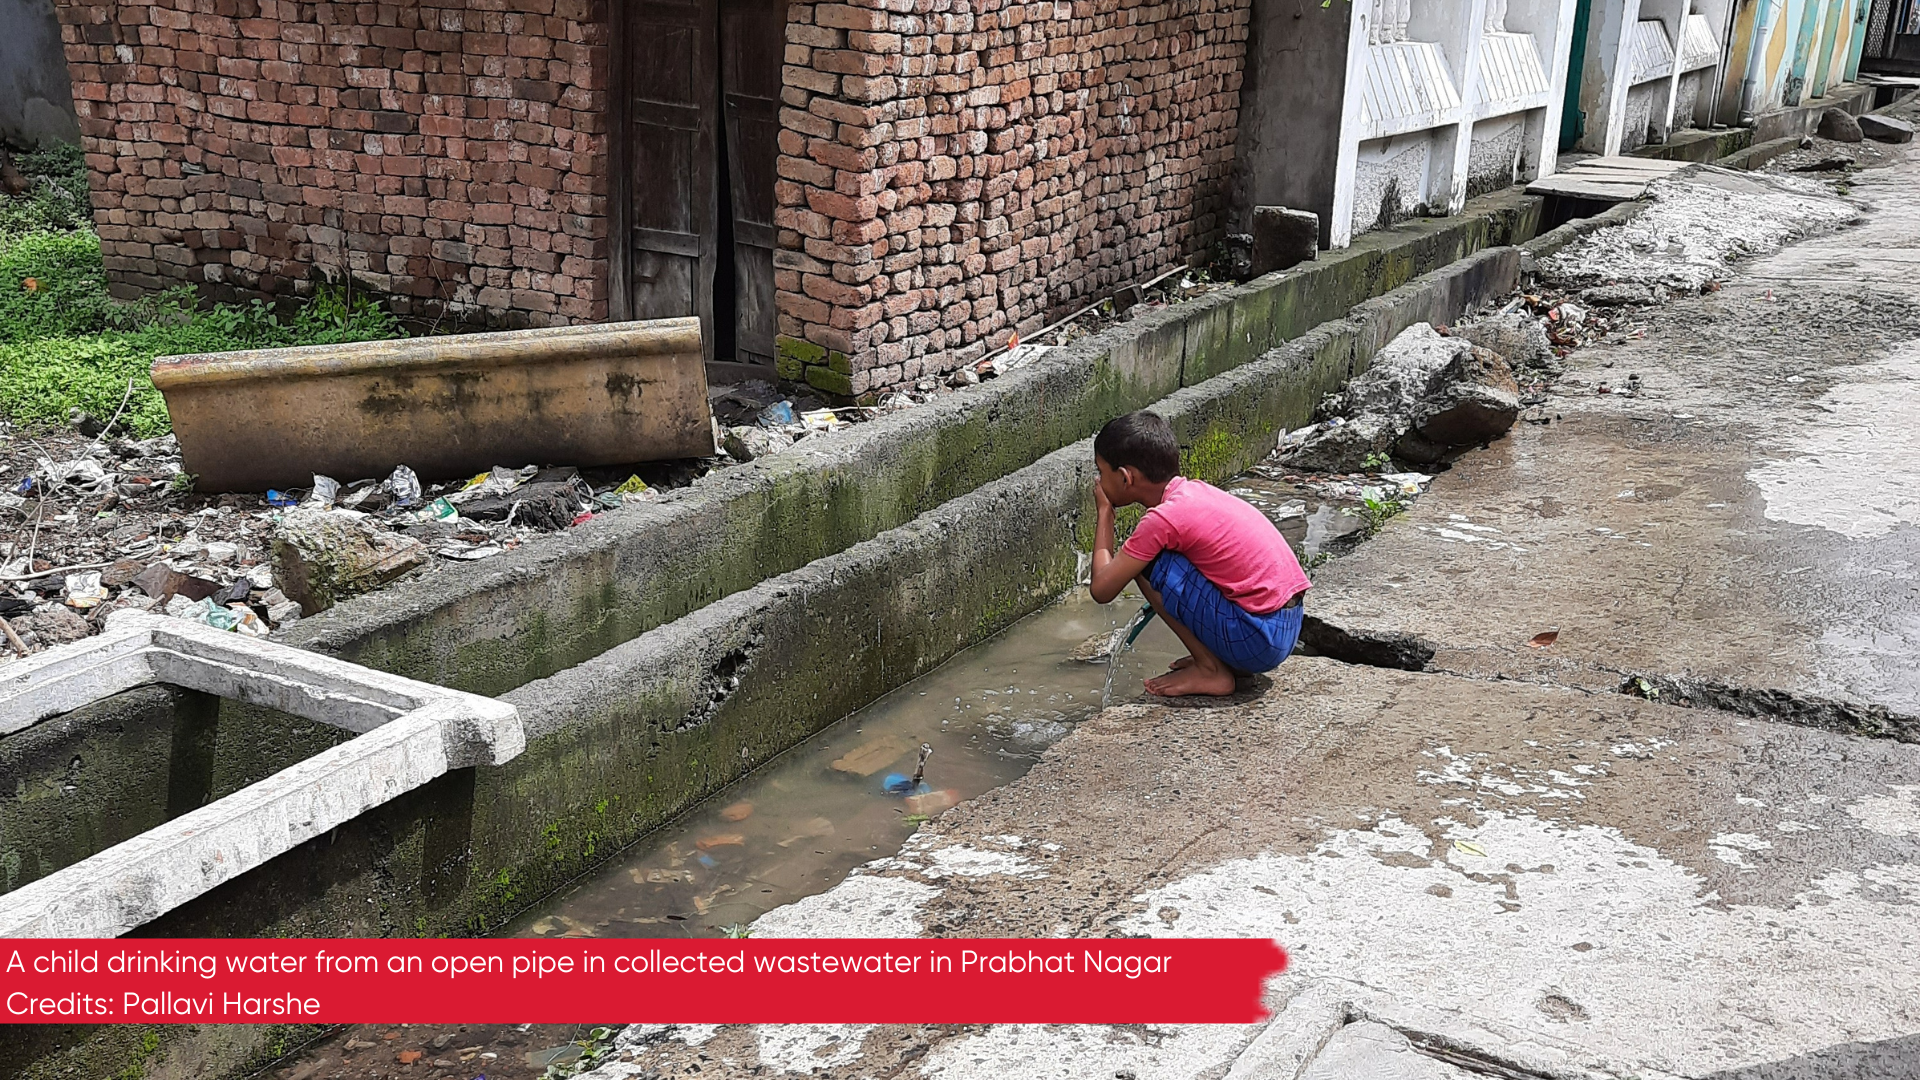 Photo of a child drinking water from an open pipe located in collected wastewater in Prabhat Nagar